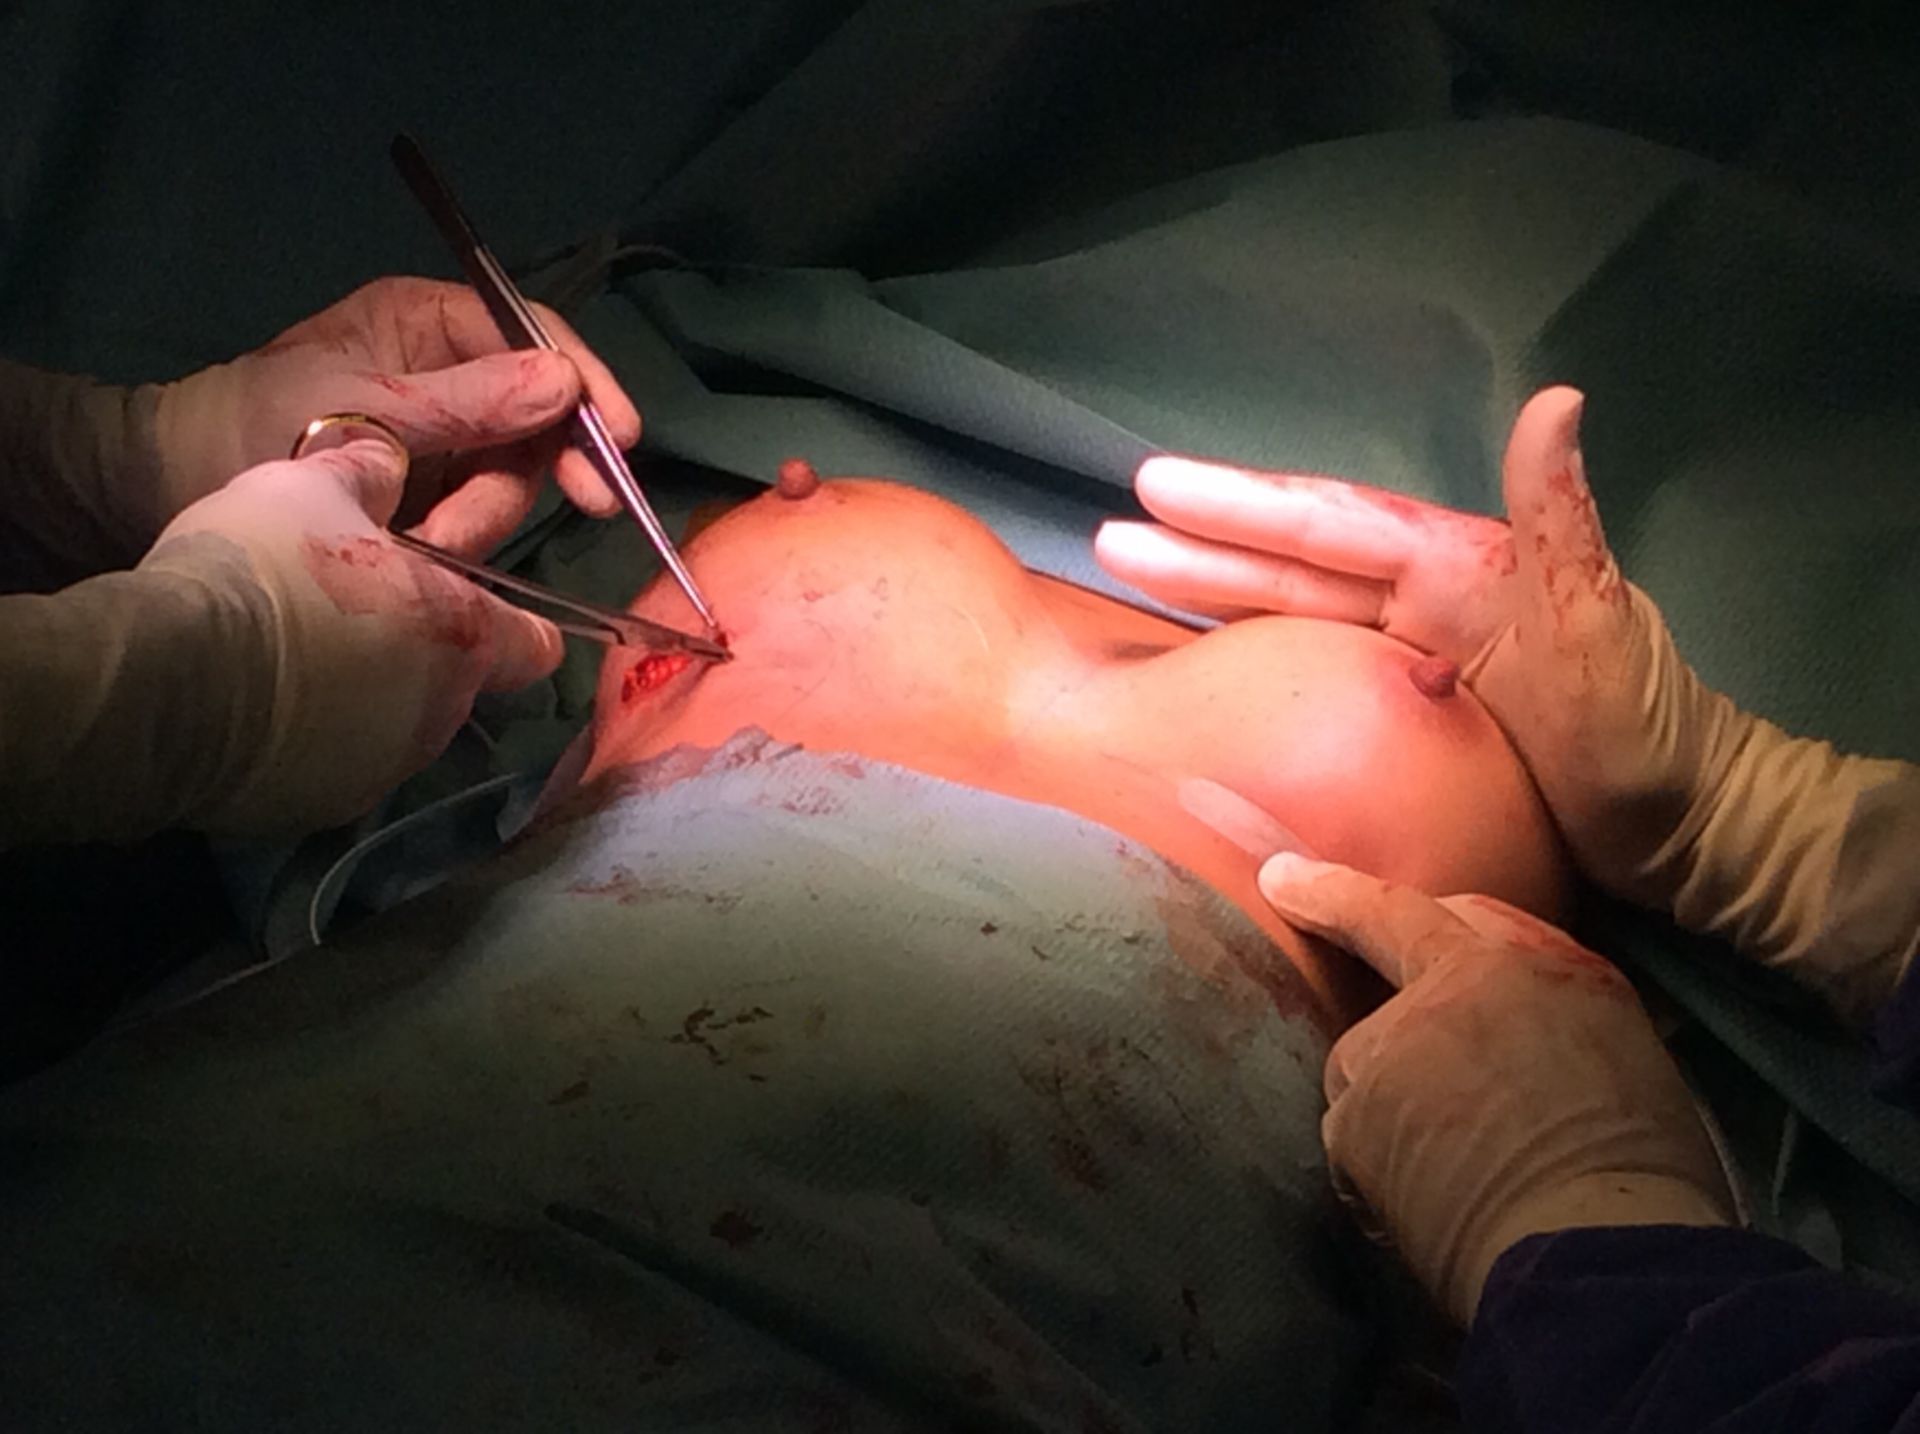 Surgical procedure of breast augmentation